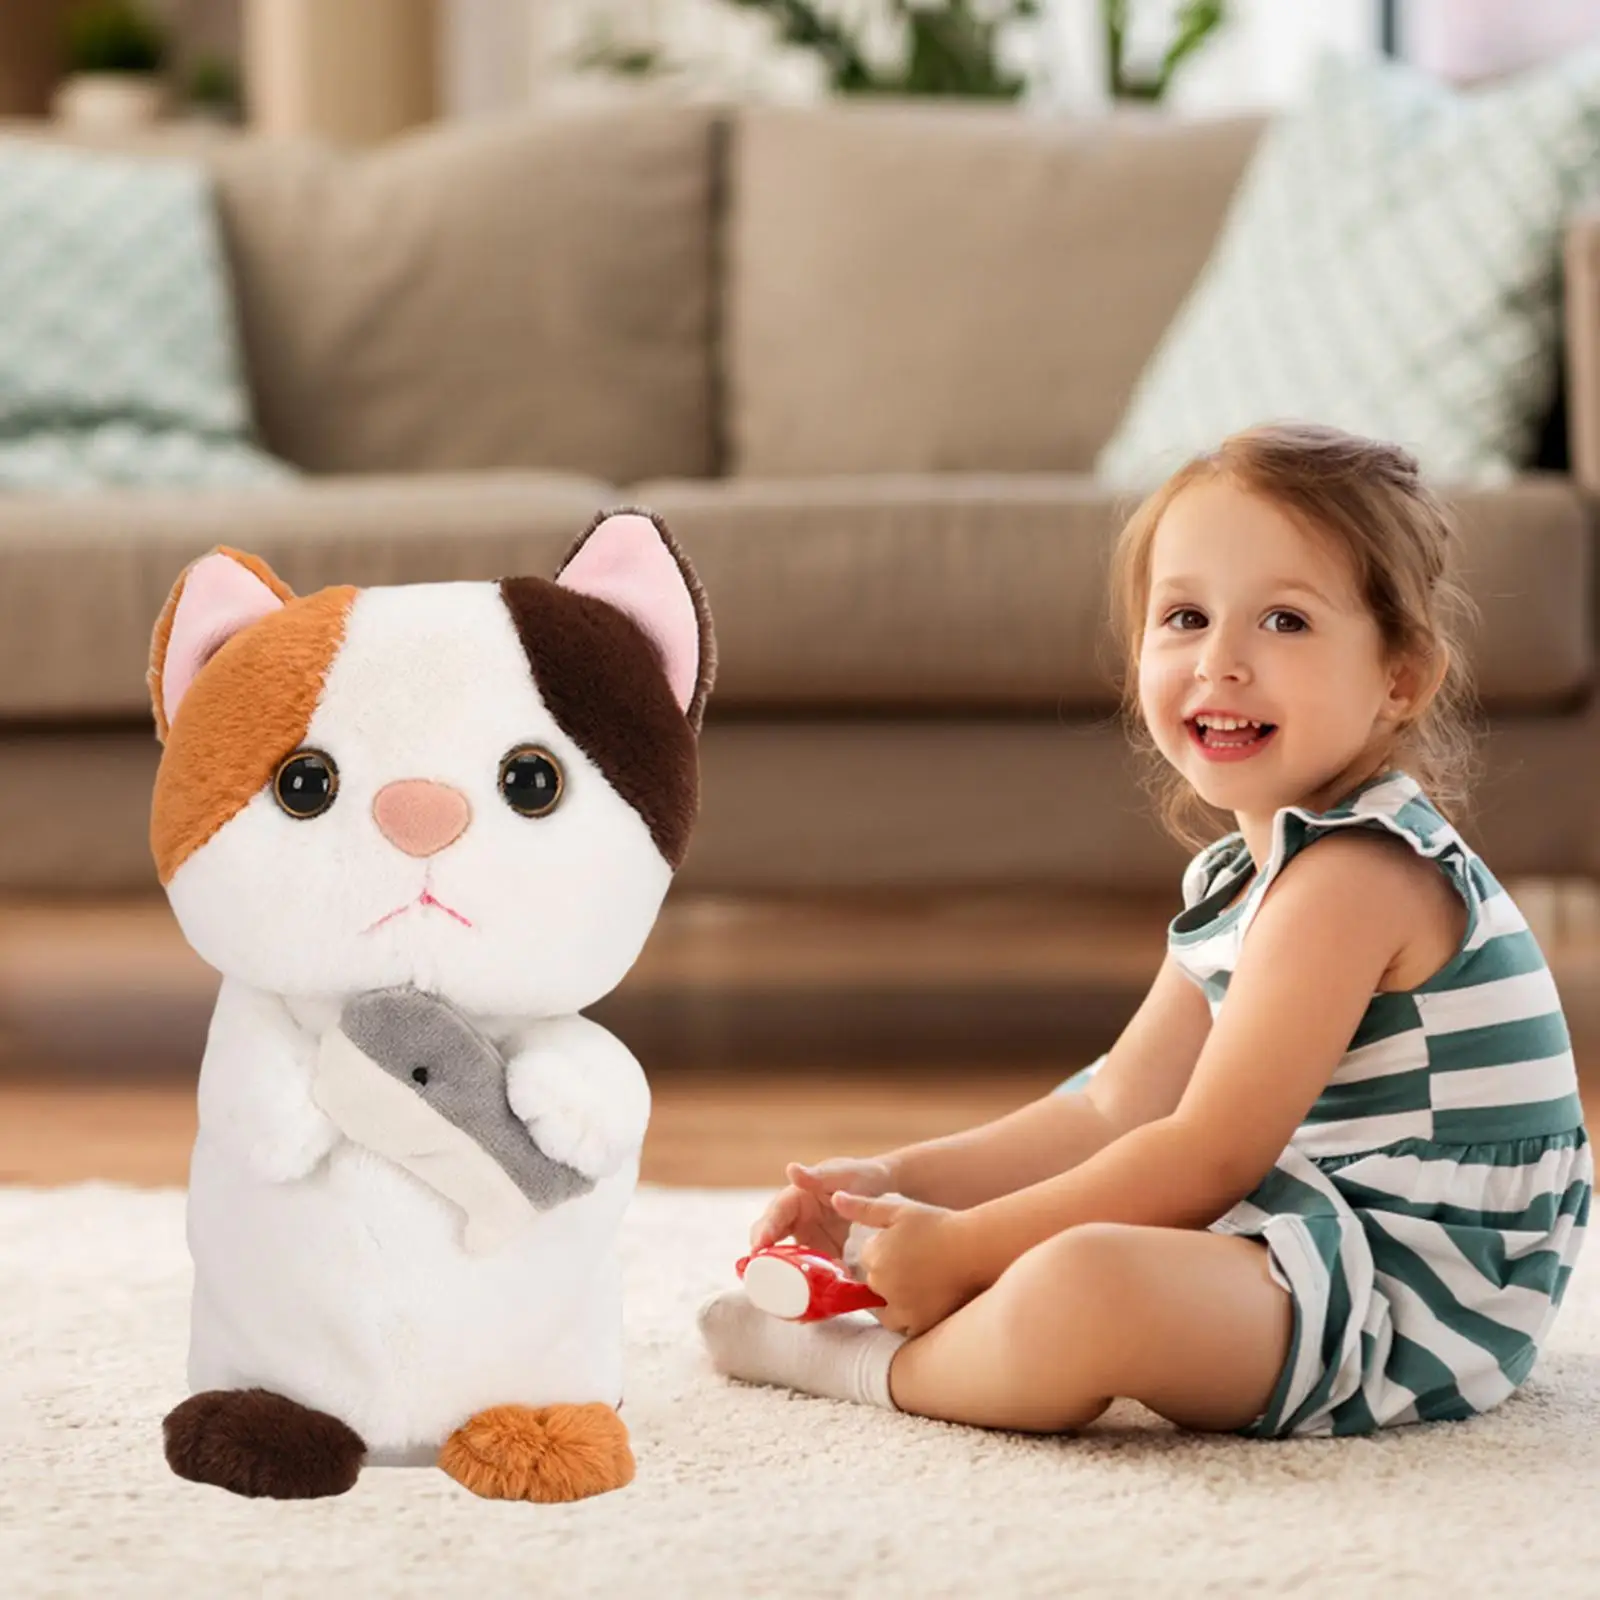 Electric Plush Doll Voice Copy Repeat Battery Powered Birthday Gifts Interactive Toy Figures for Girls Children Boys Toddlers